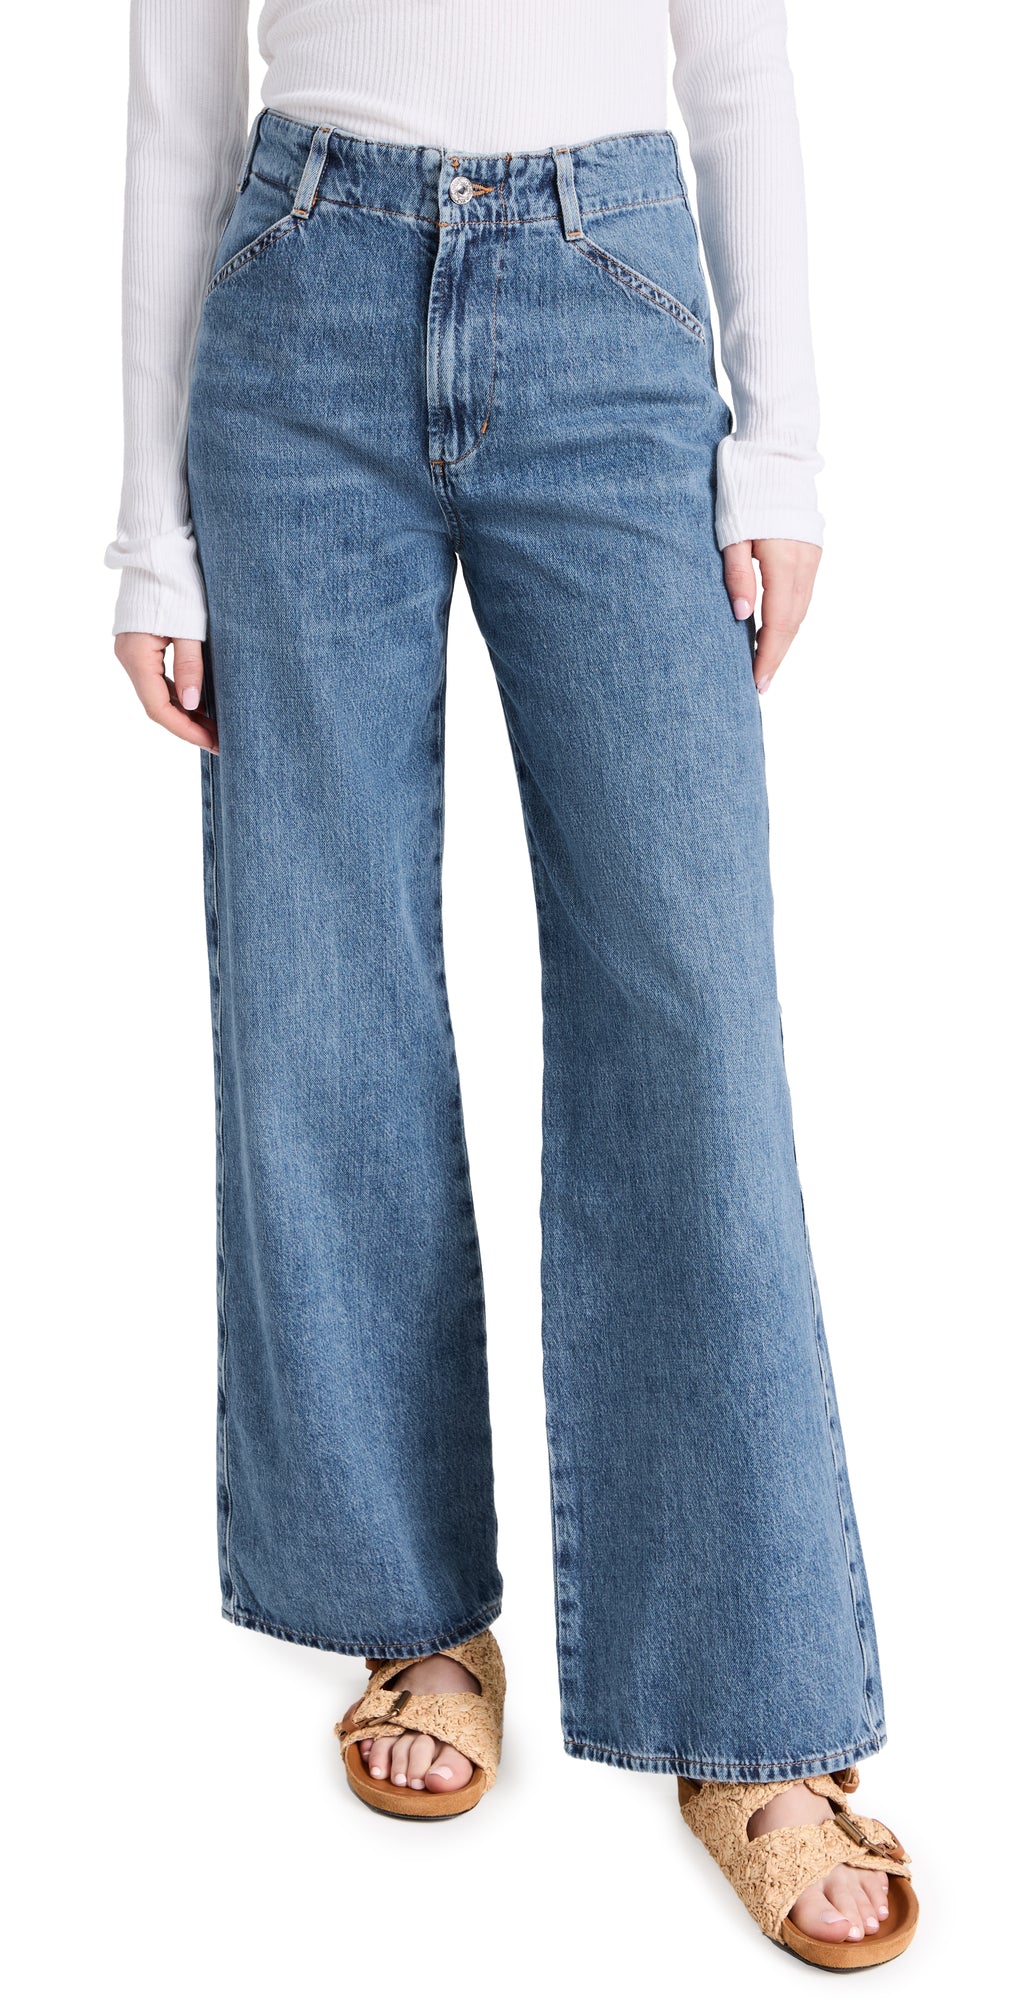 Paloma Utility Trouser Style Jeans